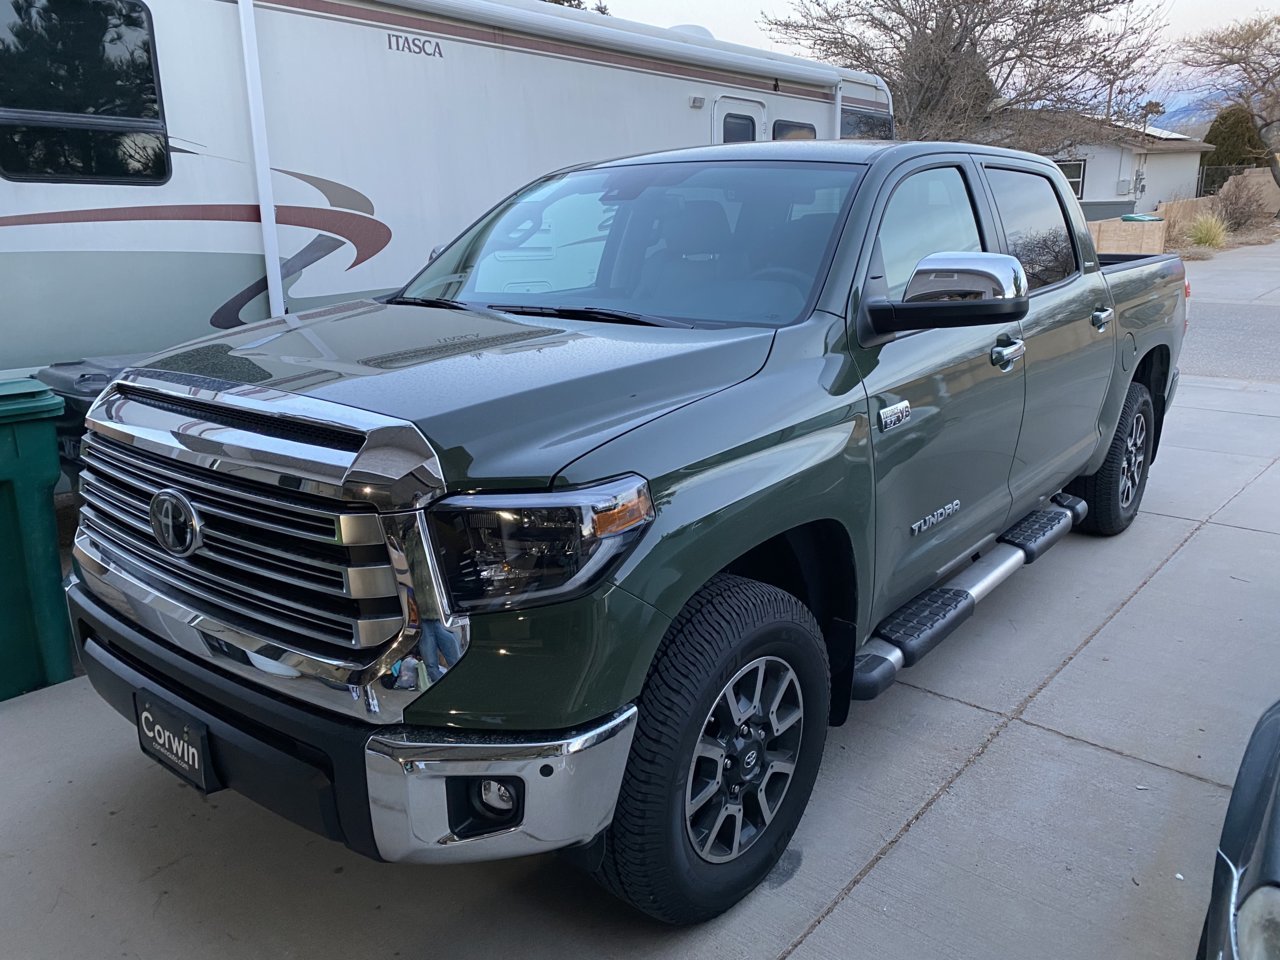 New owner from New Mexico | Toyota Tundra Forum